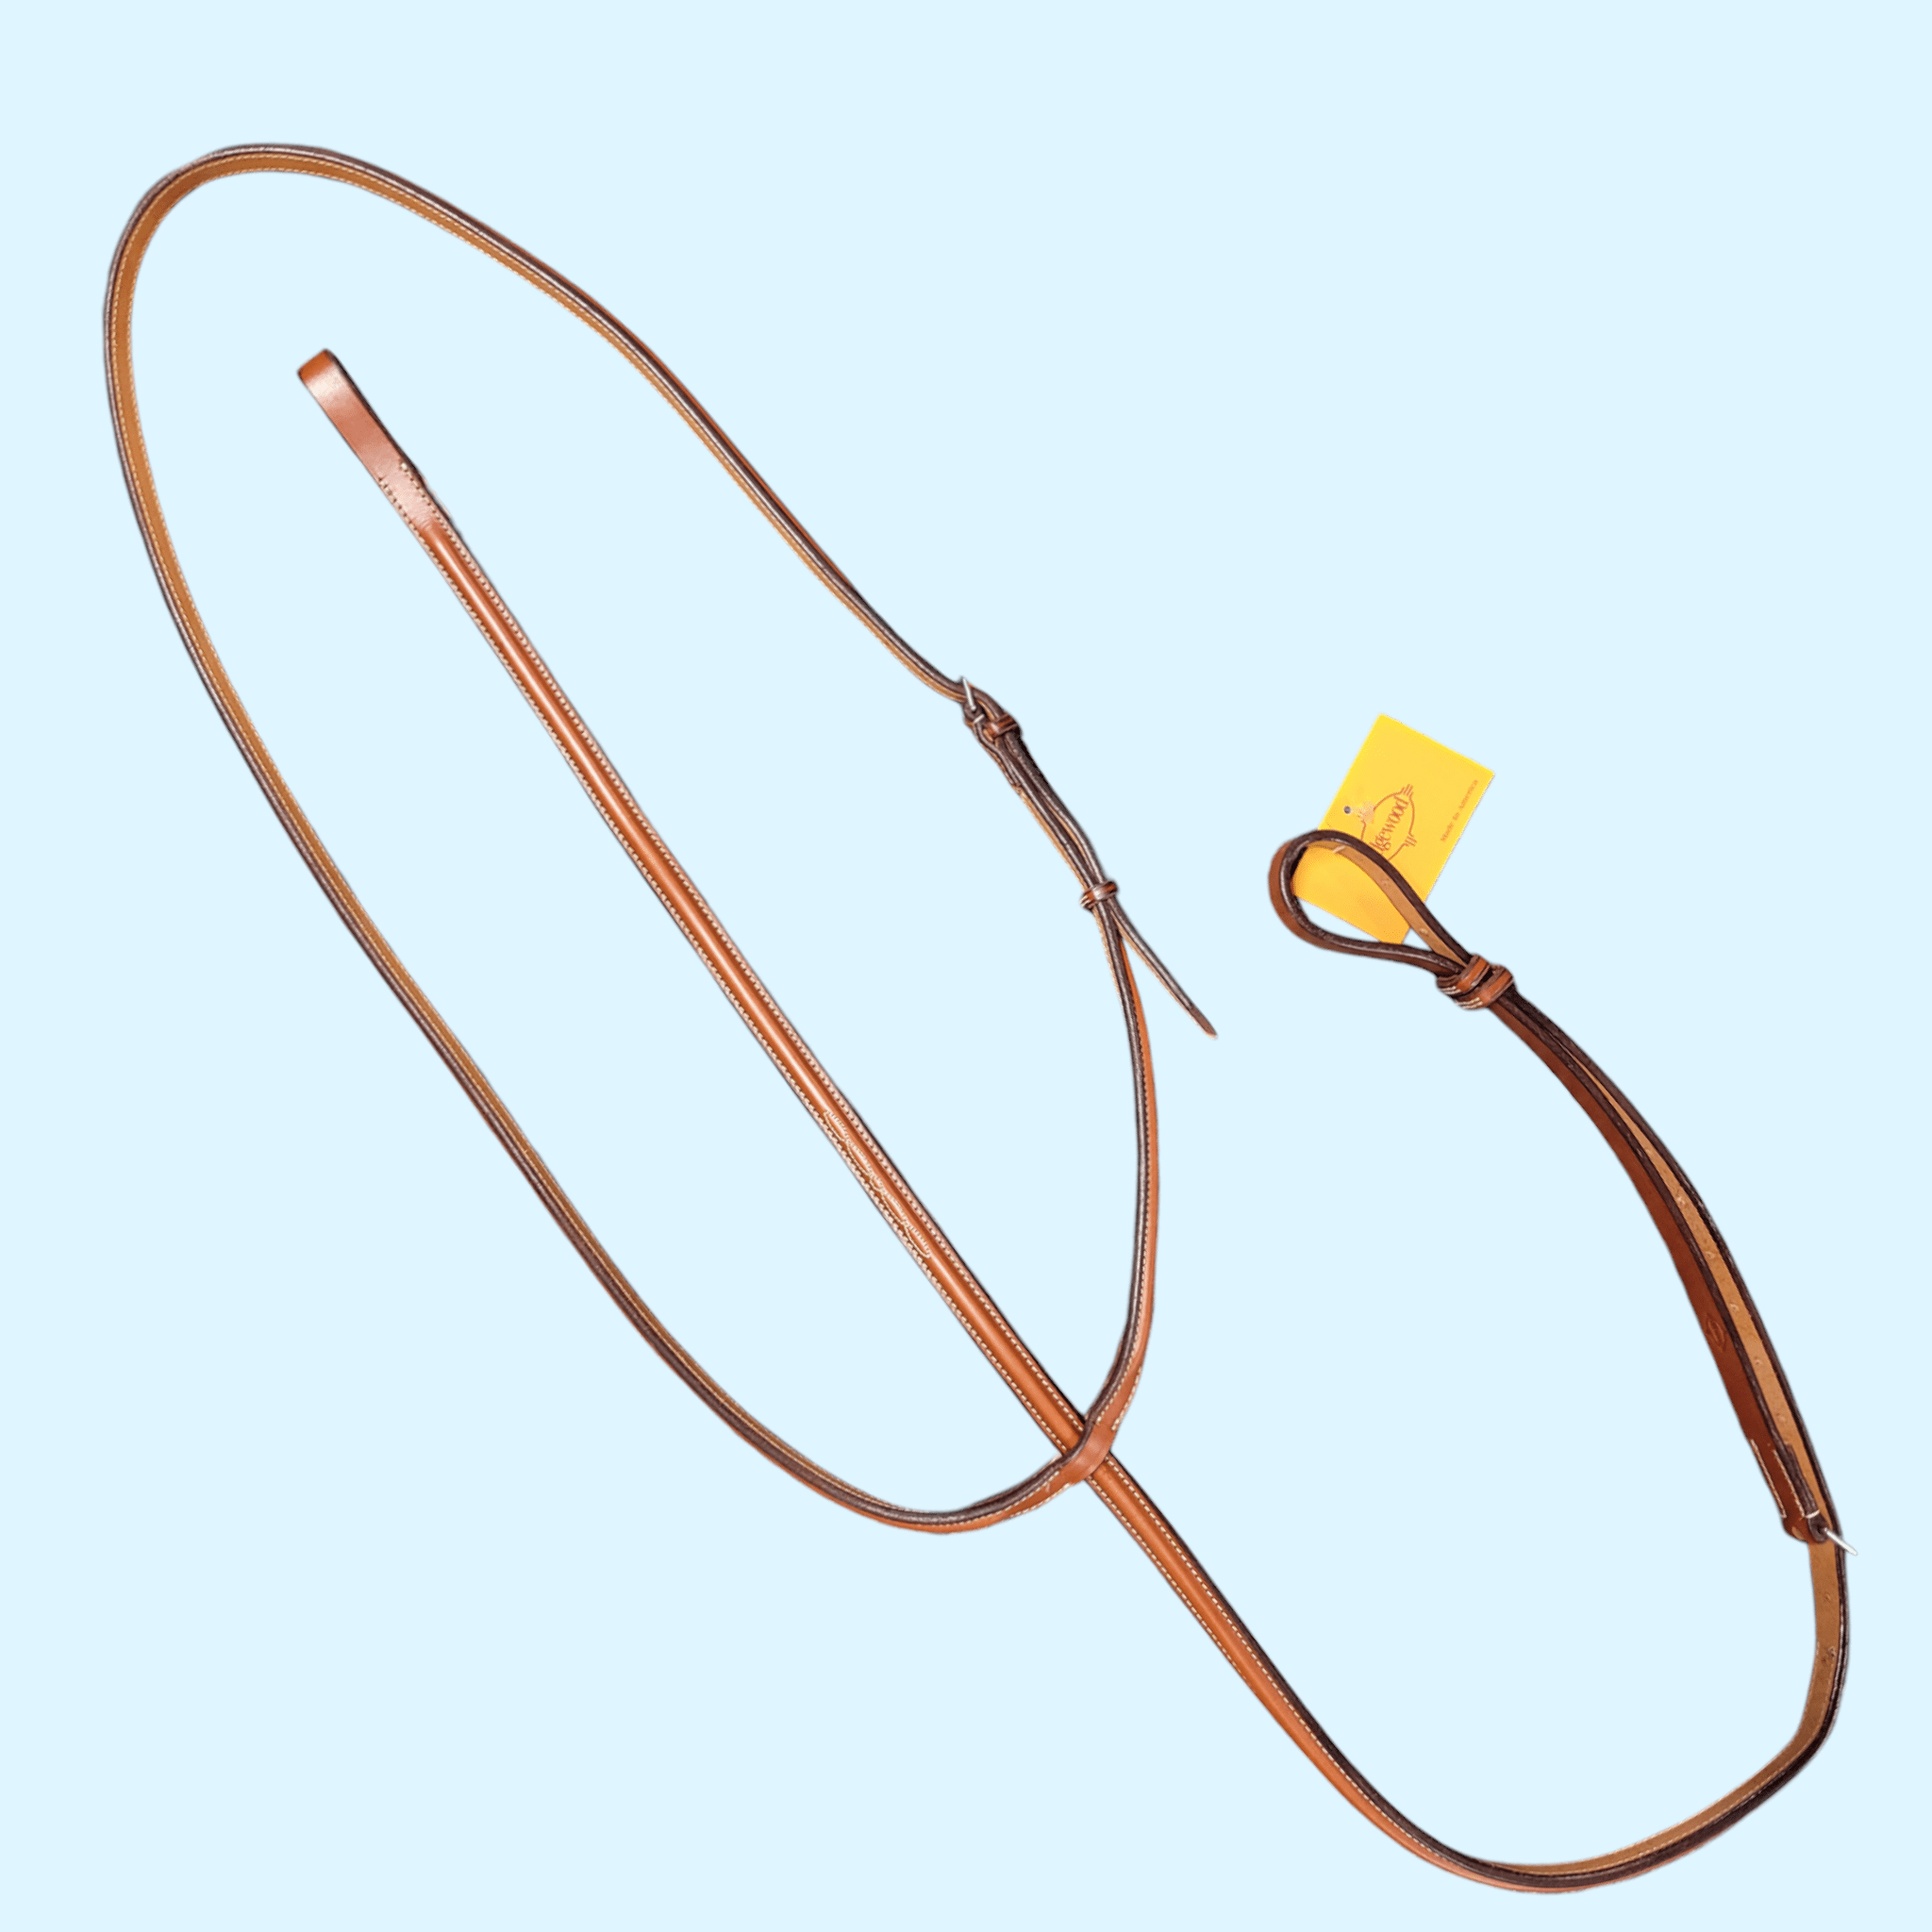 Edgewood Raised Fancy Stitch Standing Martingale in Chestnut - Oversize